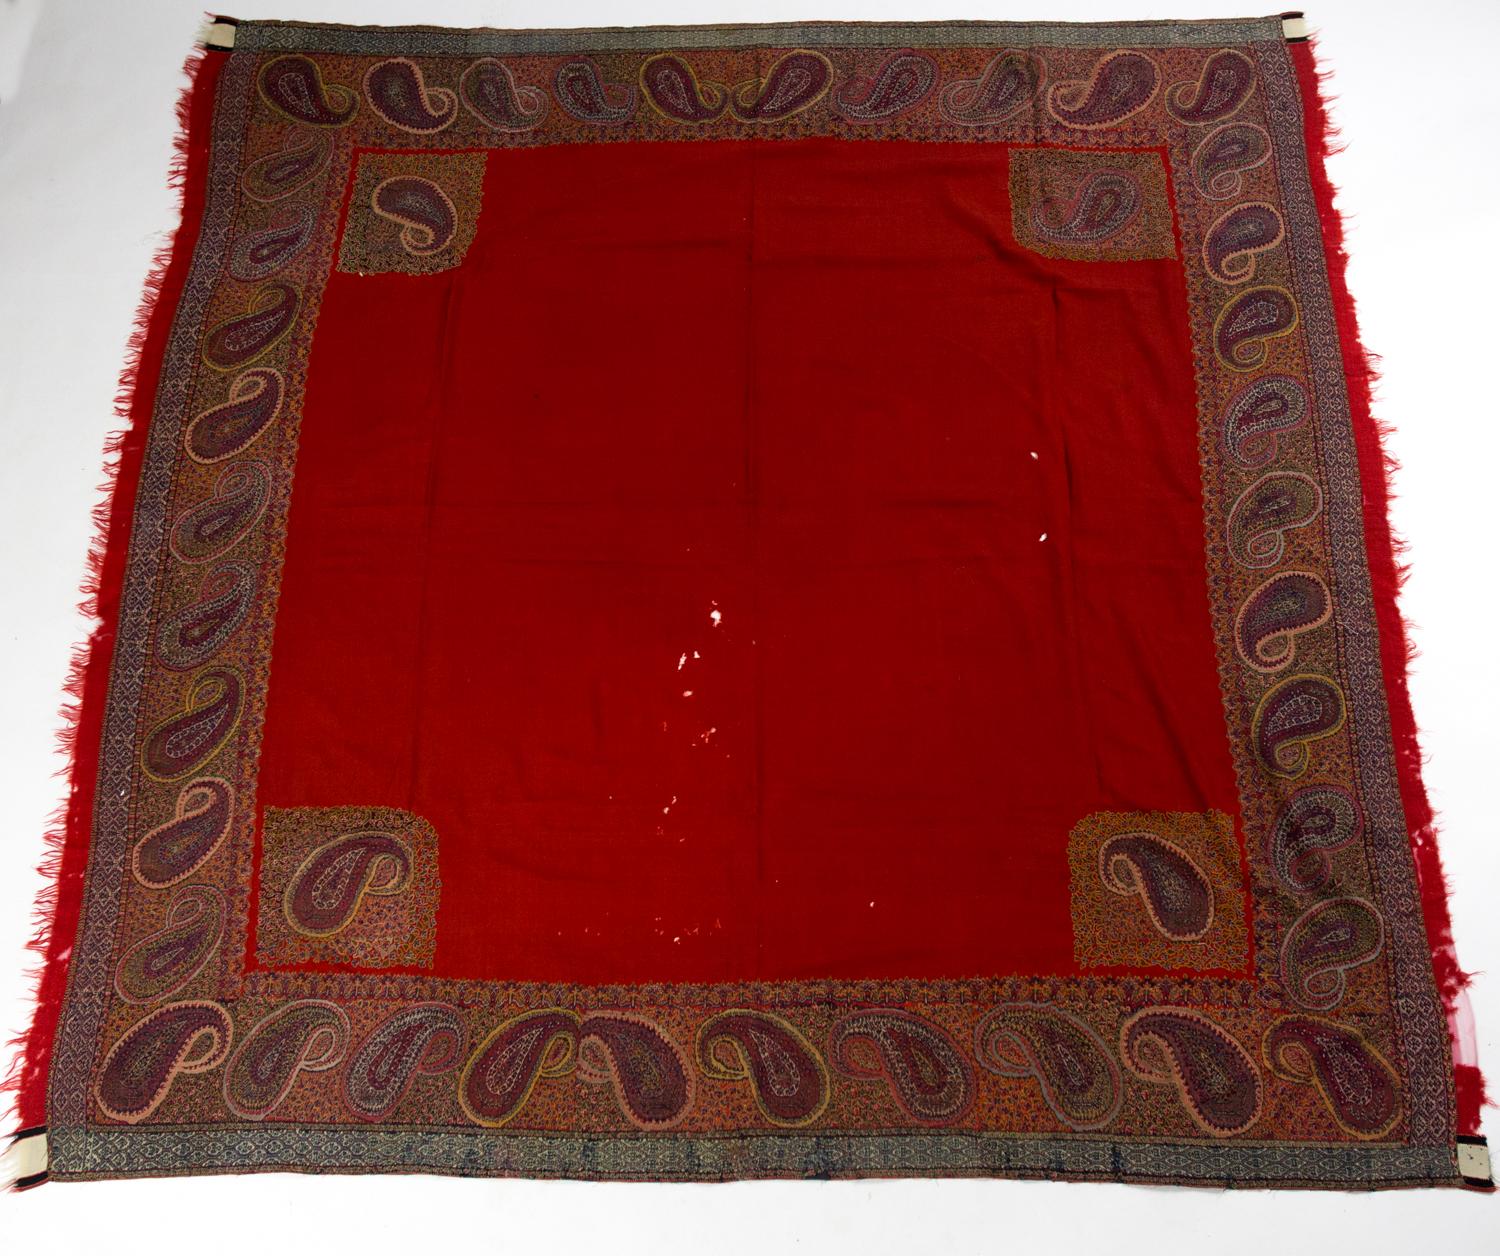 Indian Cashmere Kani Squared Shawl Circa 1840 In Good Condition For Sale In Toulon, FR